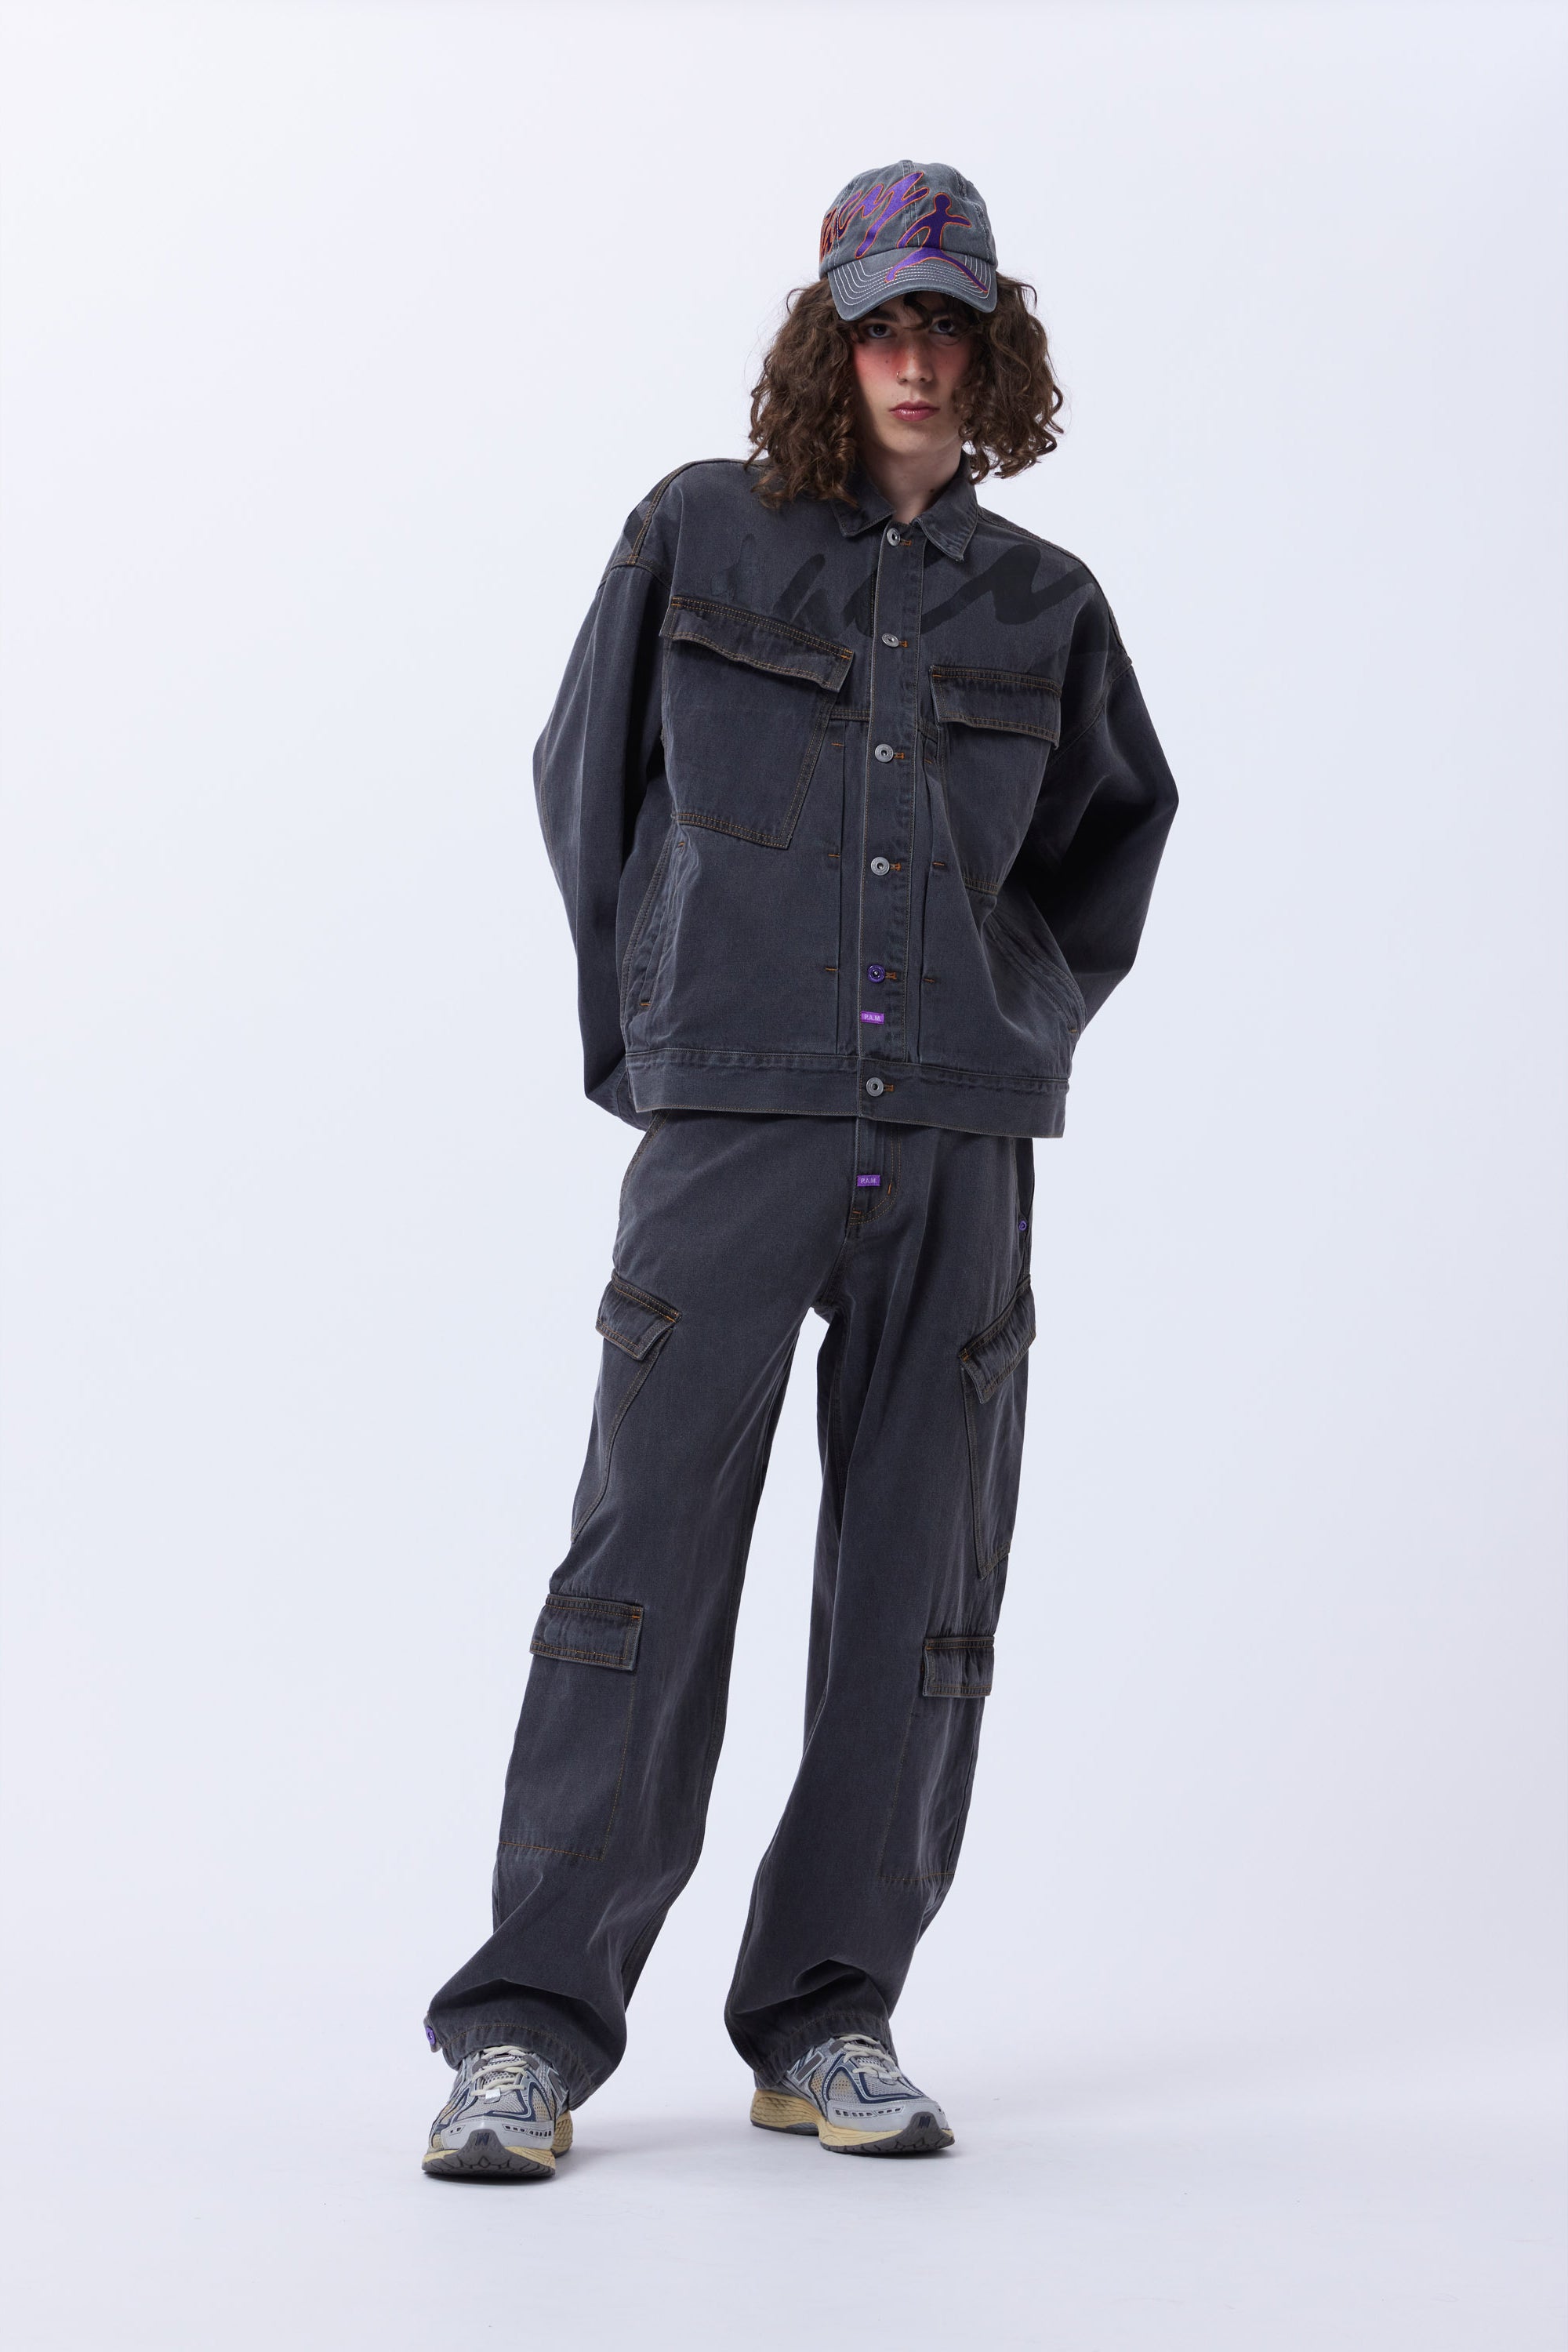 The CYCLOPES LOW RISE POCKET DENIM JEAN  available online with global shipping, and in PAM Stores Melbourne and Sydney.